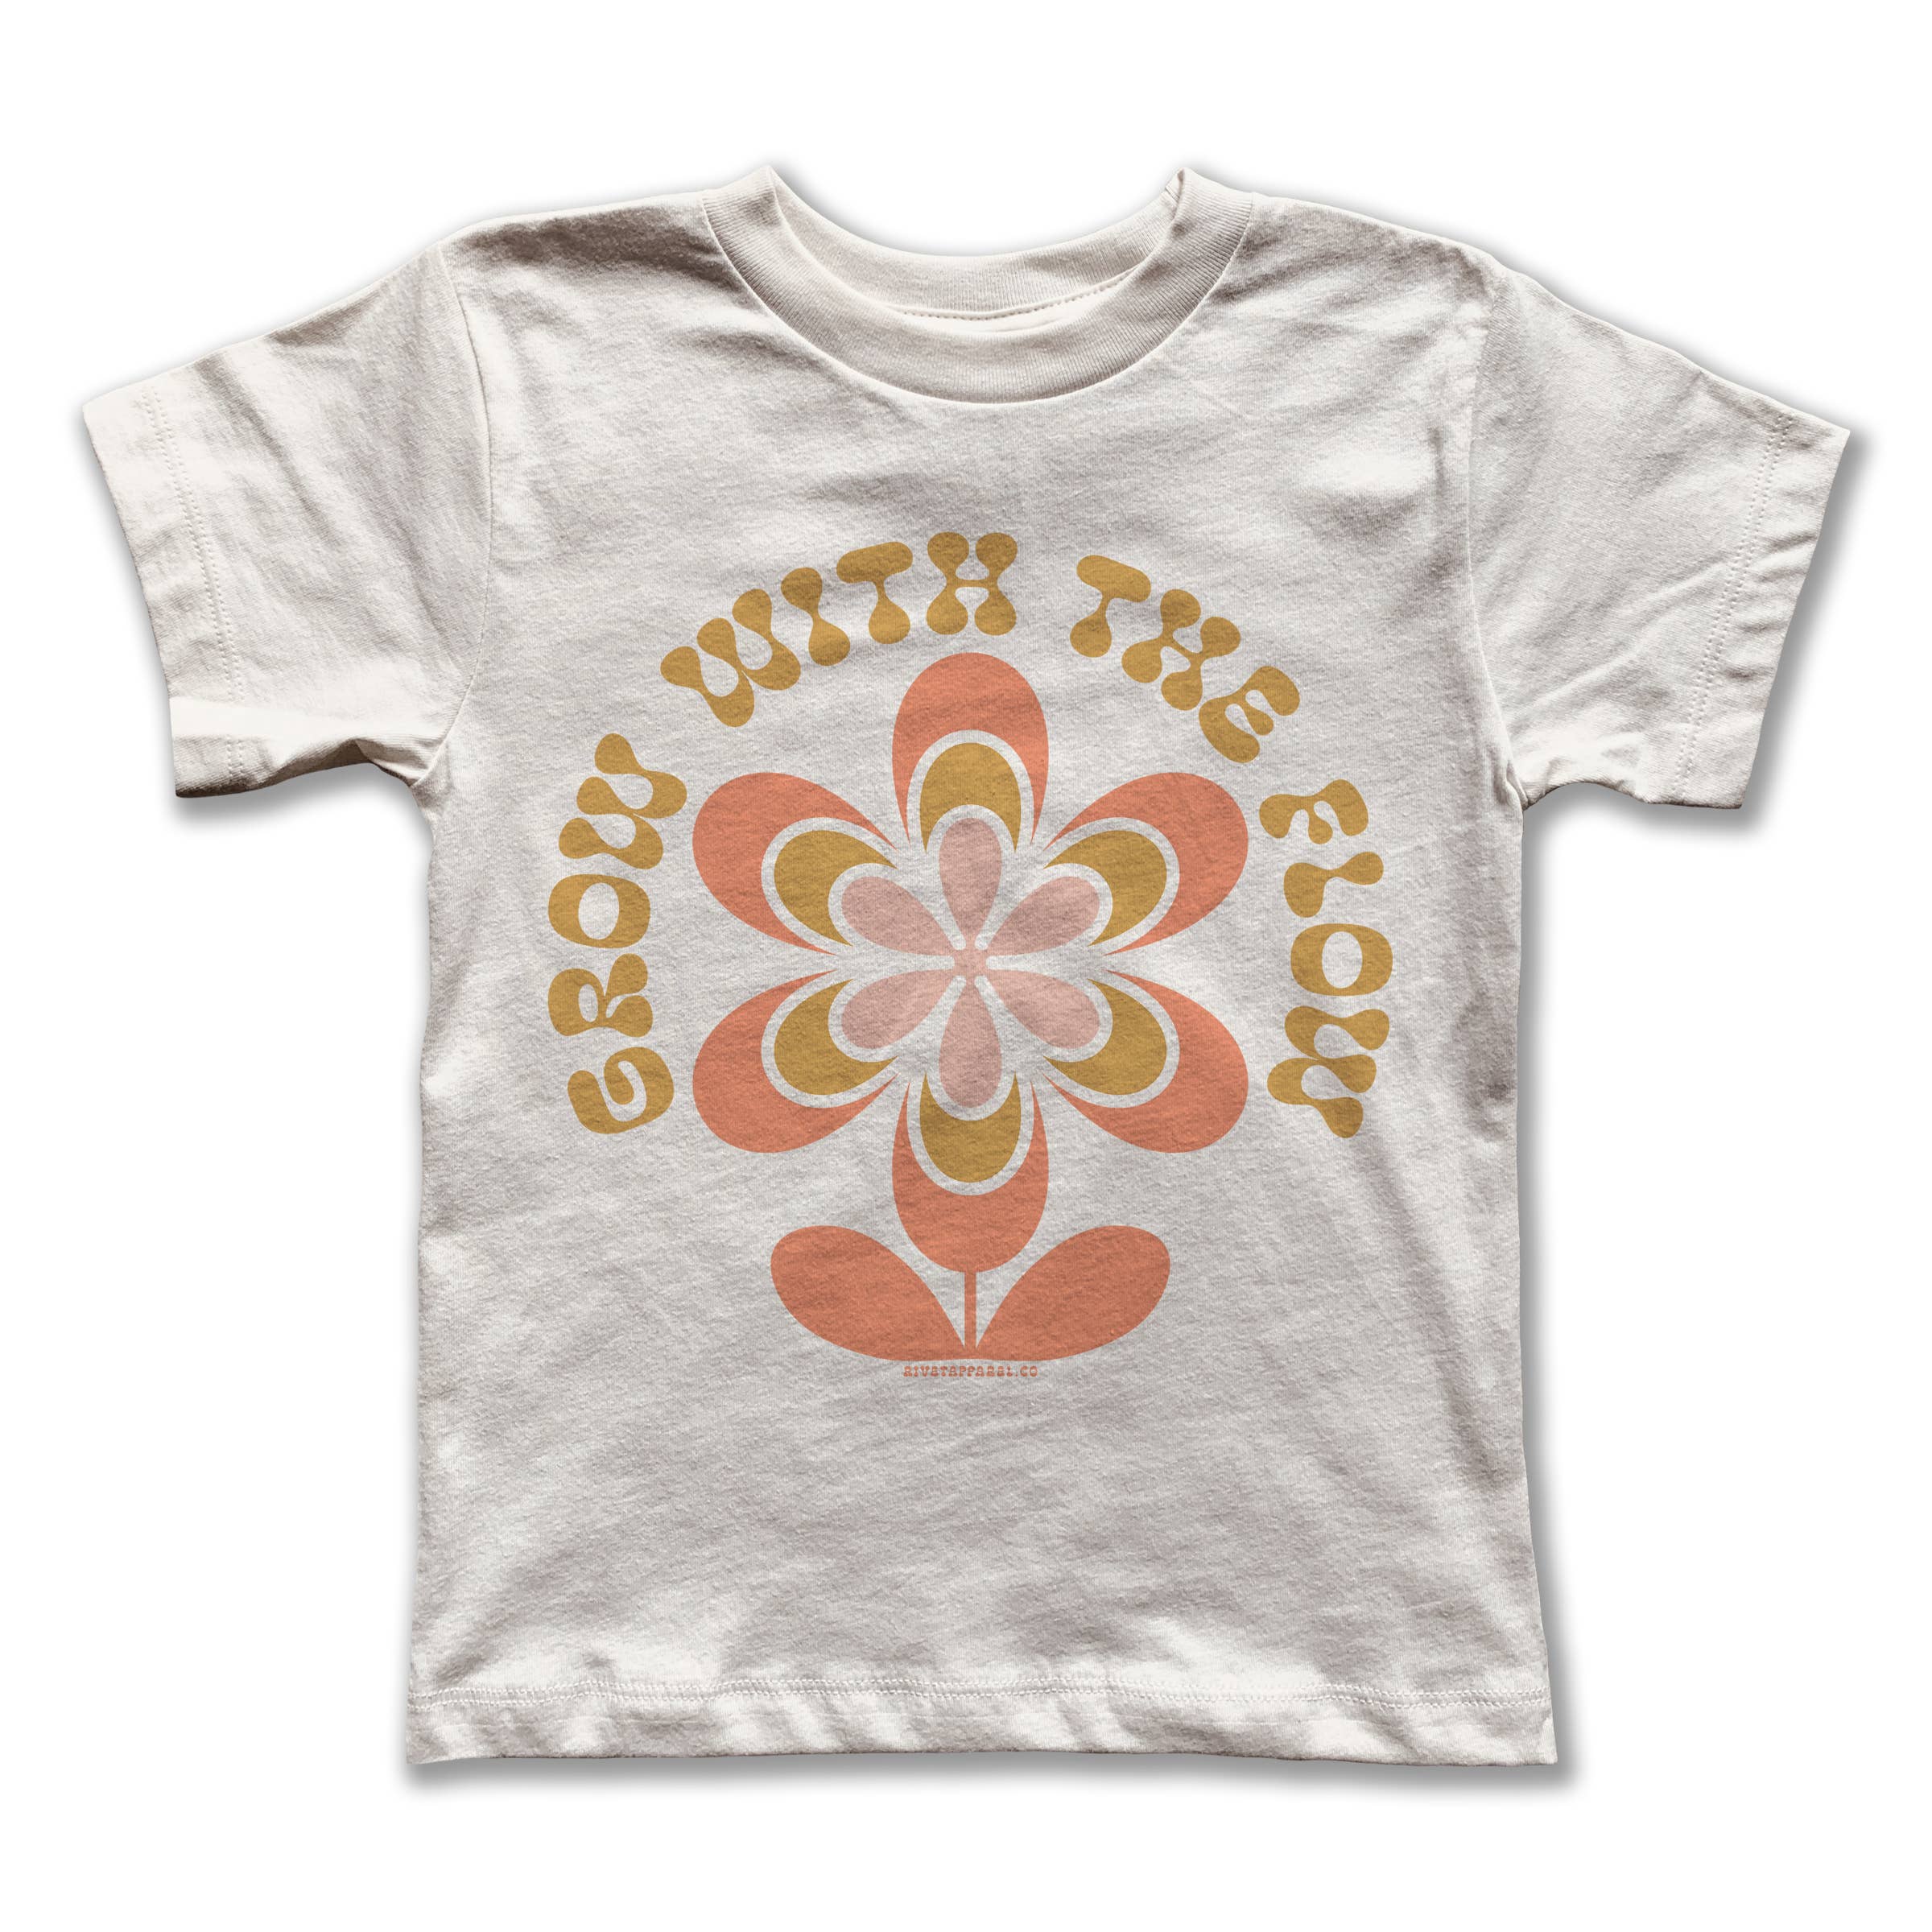 Grow With the Flow Adult Tee